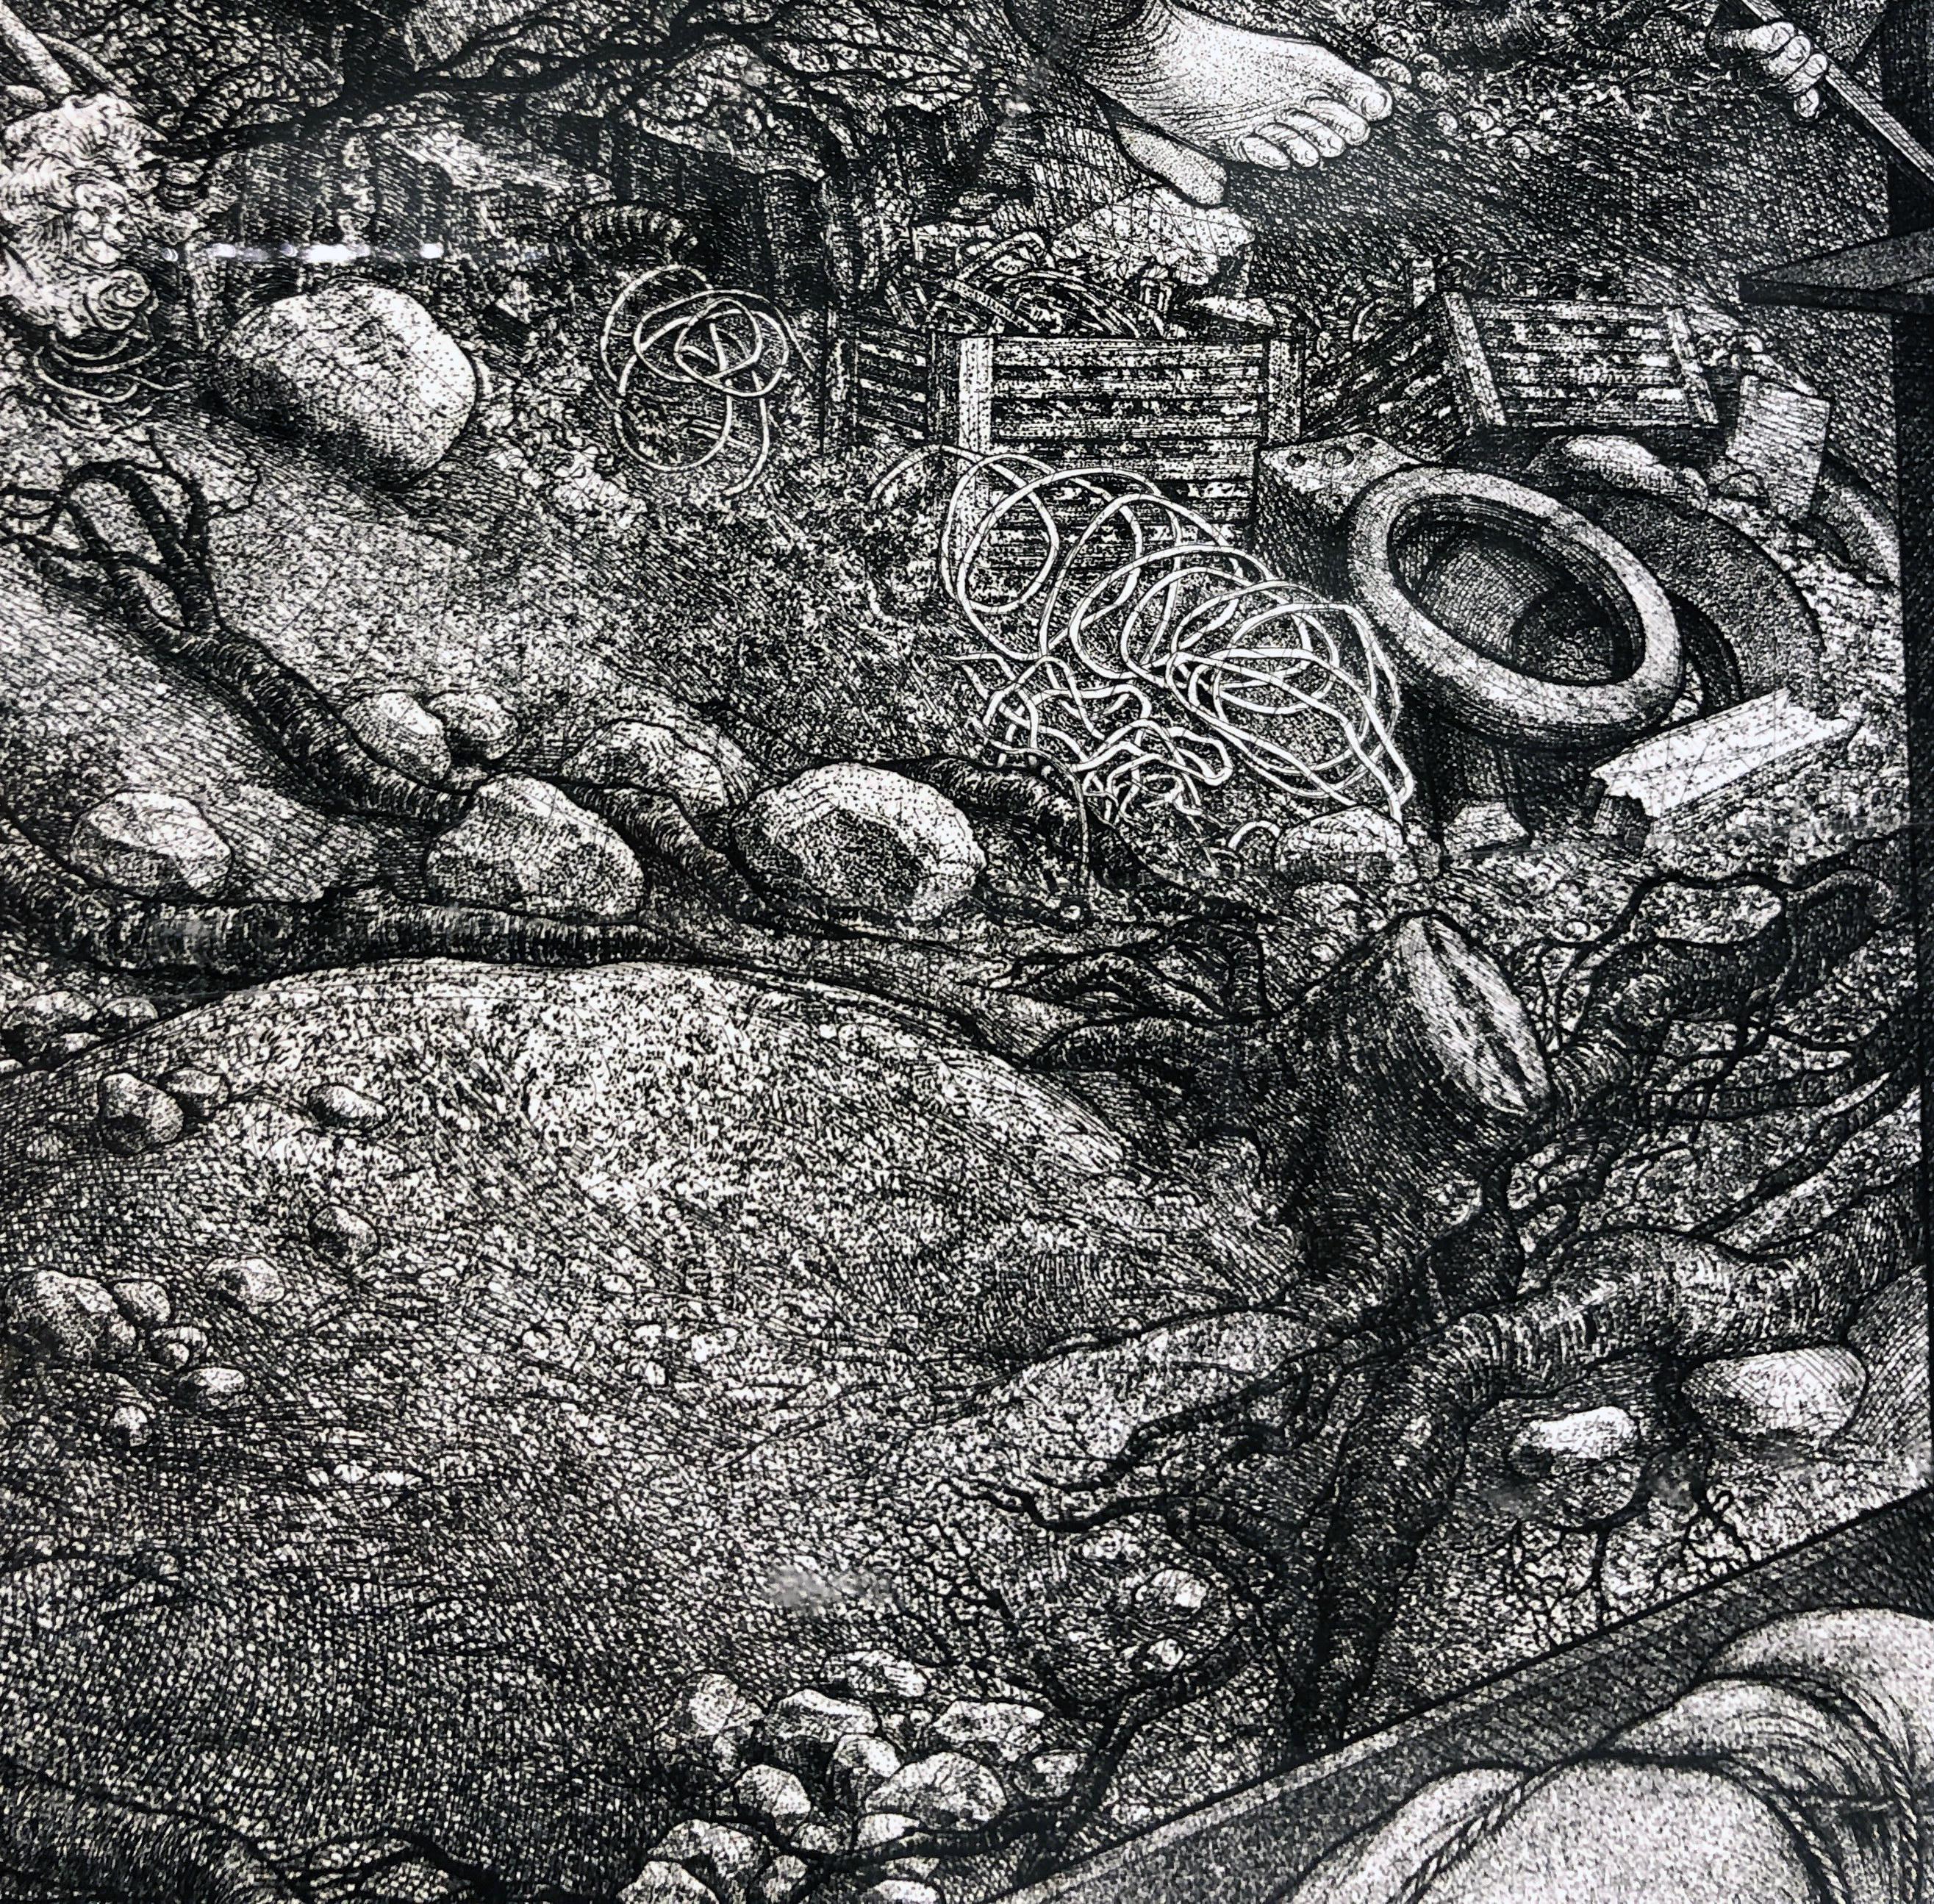 Monuments - Highly Detailed Allegorical, Surreal Etching with Multiple Figures - Contemporary Print by David Becker